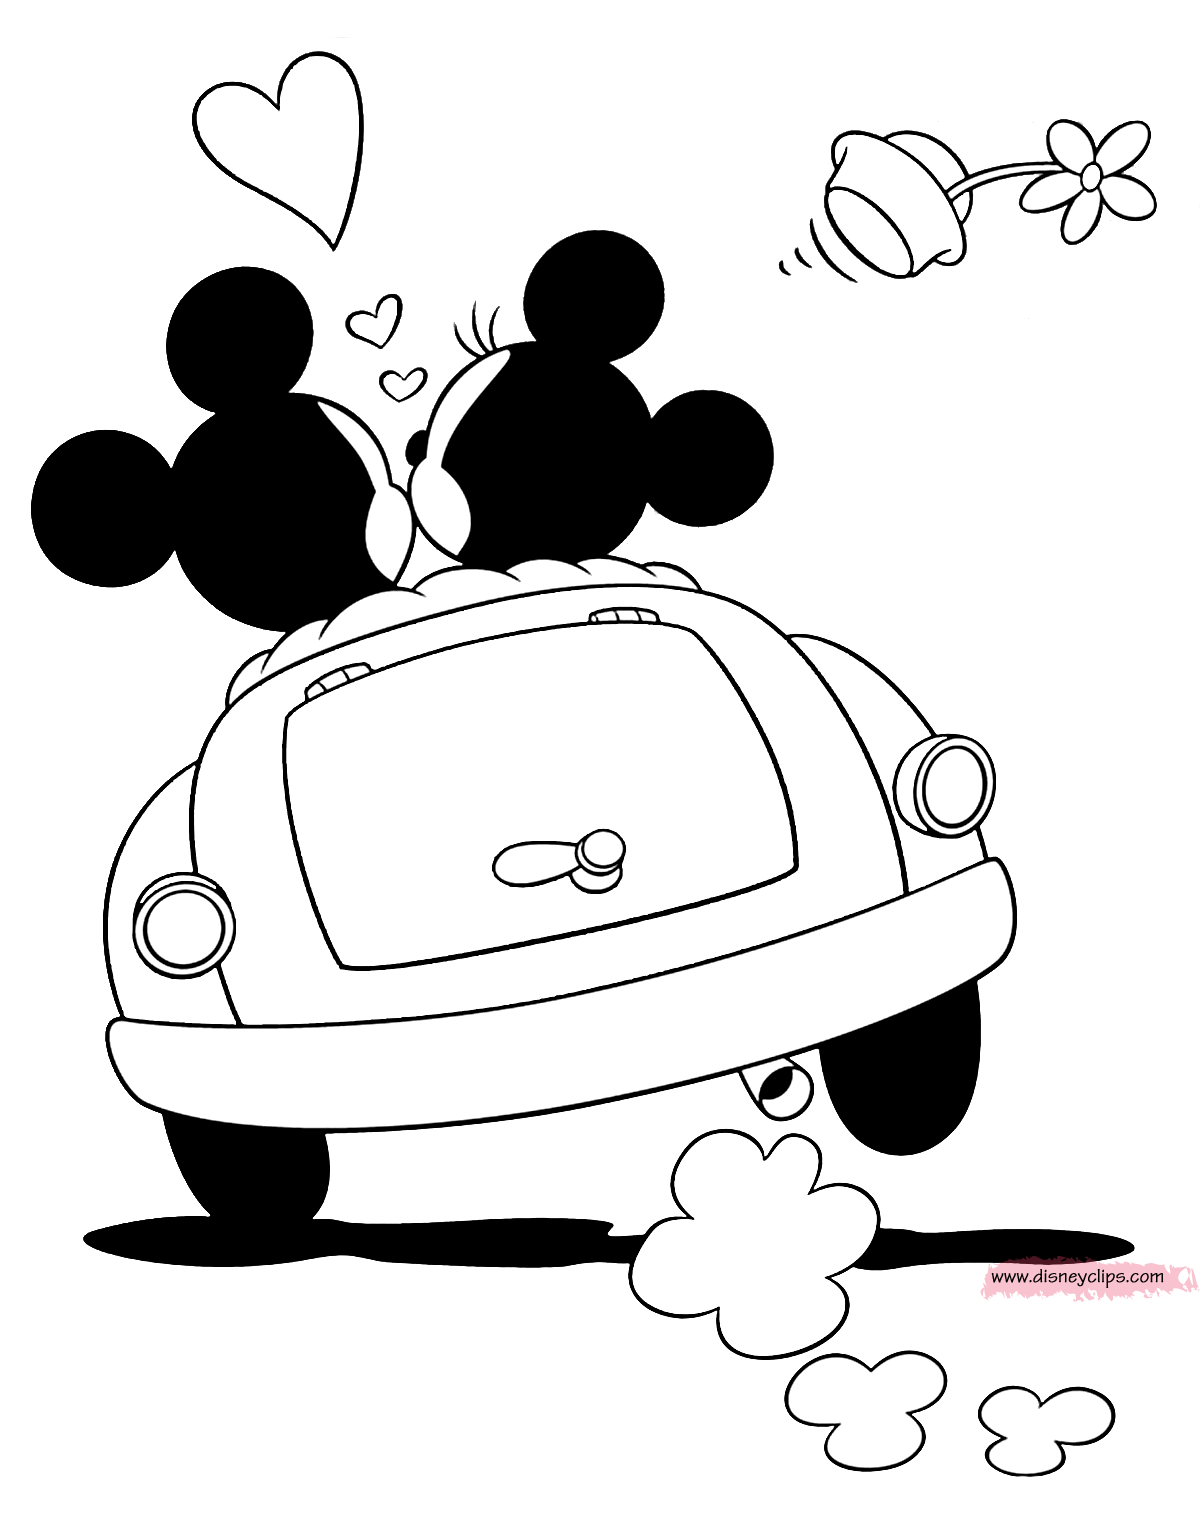 Mickey Mouse Valentines Day Coloring Pages 28 Images Free 2